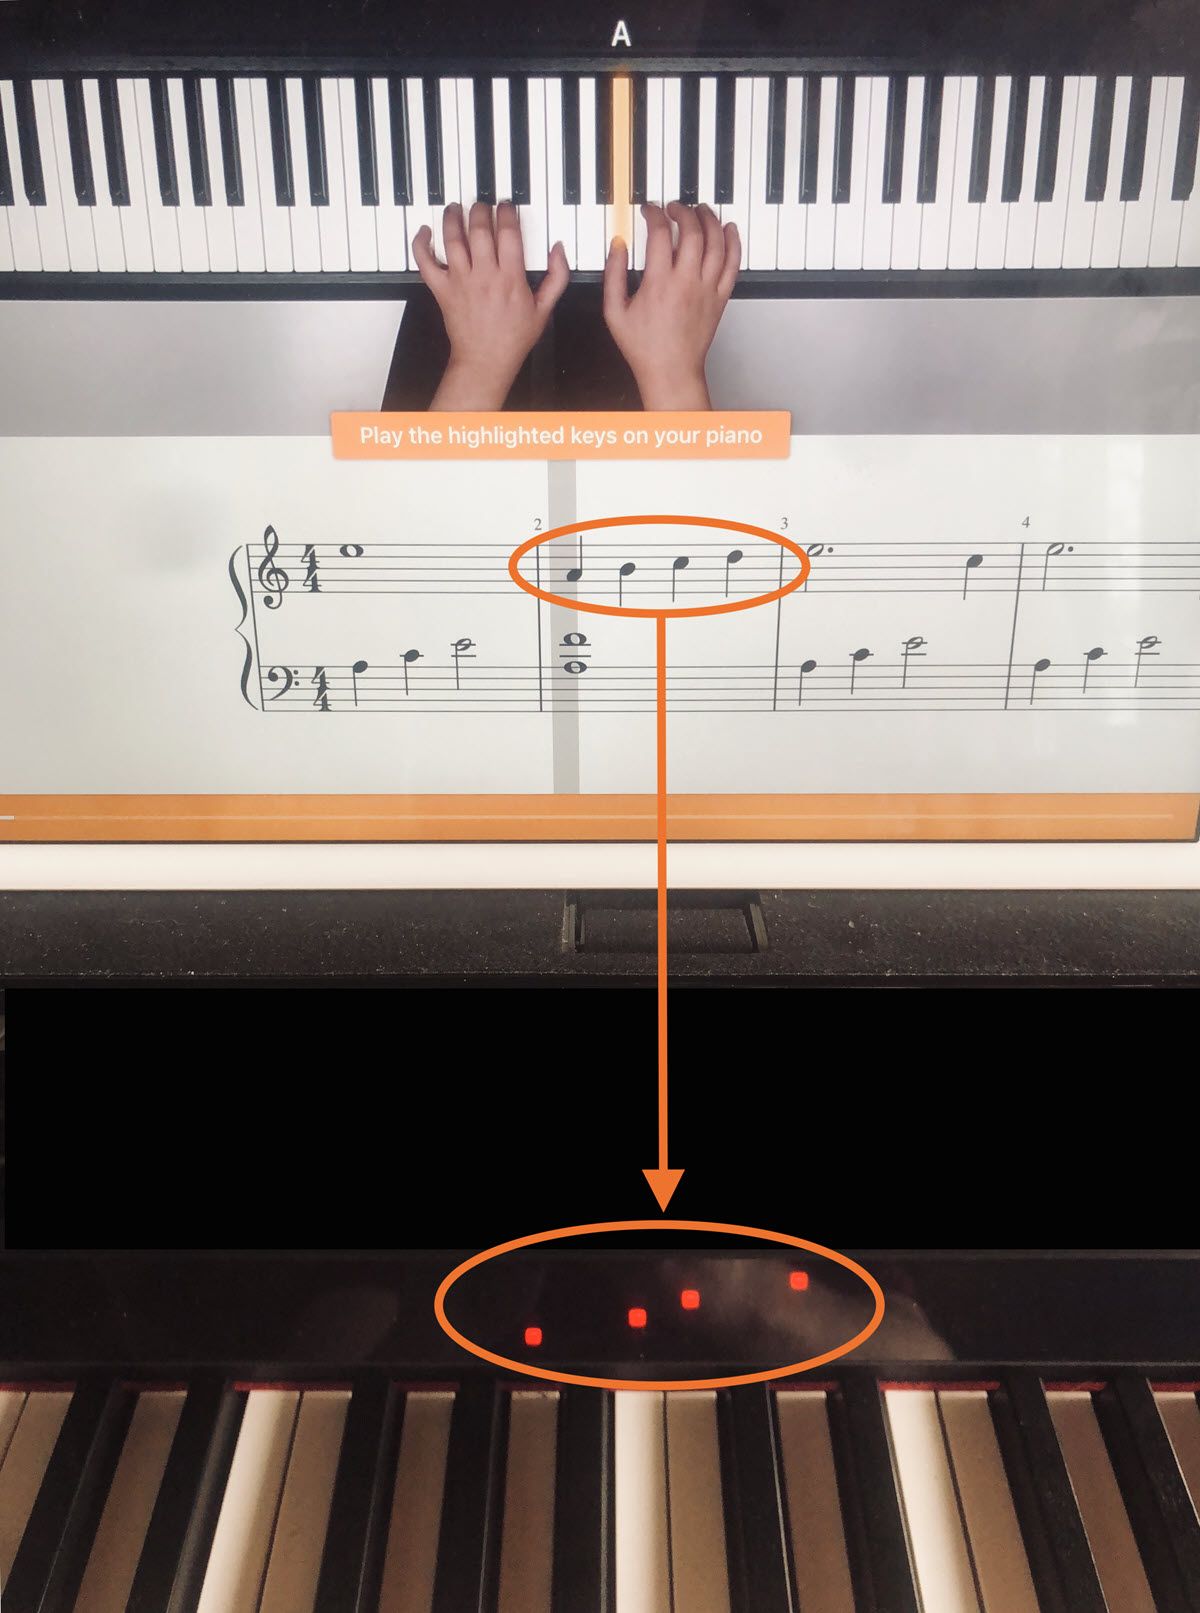 Screenshot of app showing hand placement on the keyboard, with specific notes circled in music charts and the lights above the corresponding keys on the Clavinova keyboard.